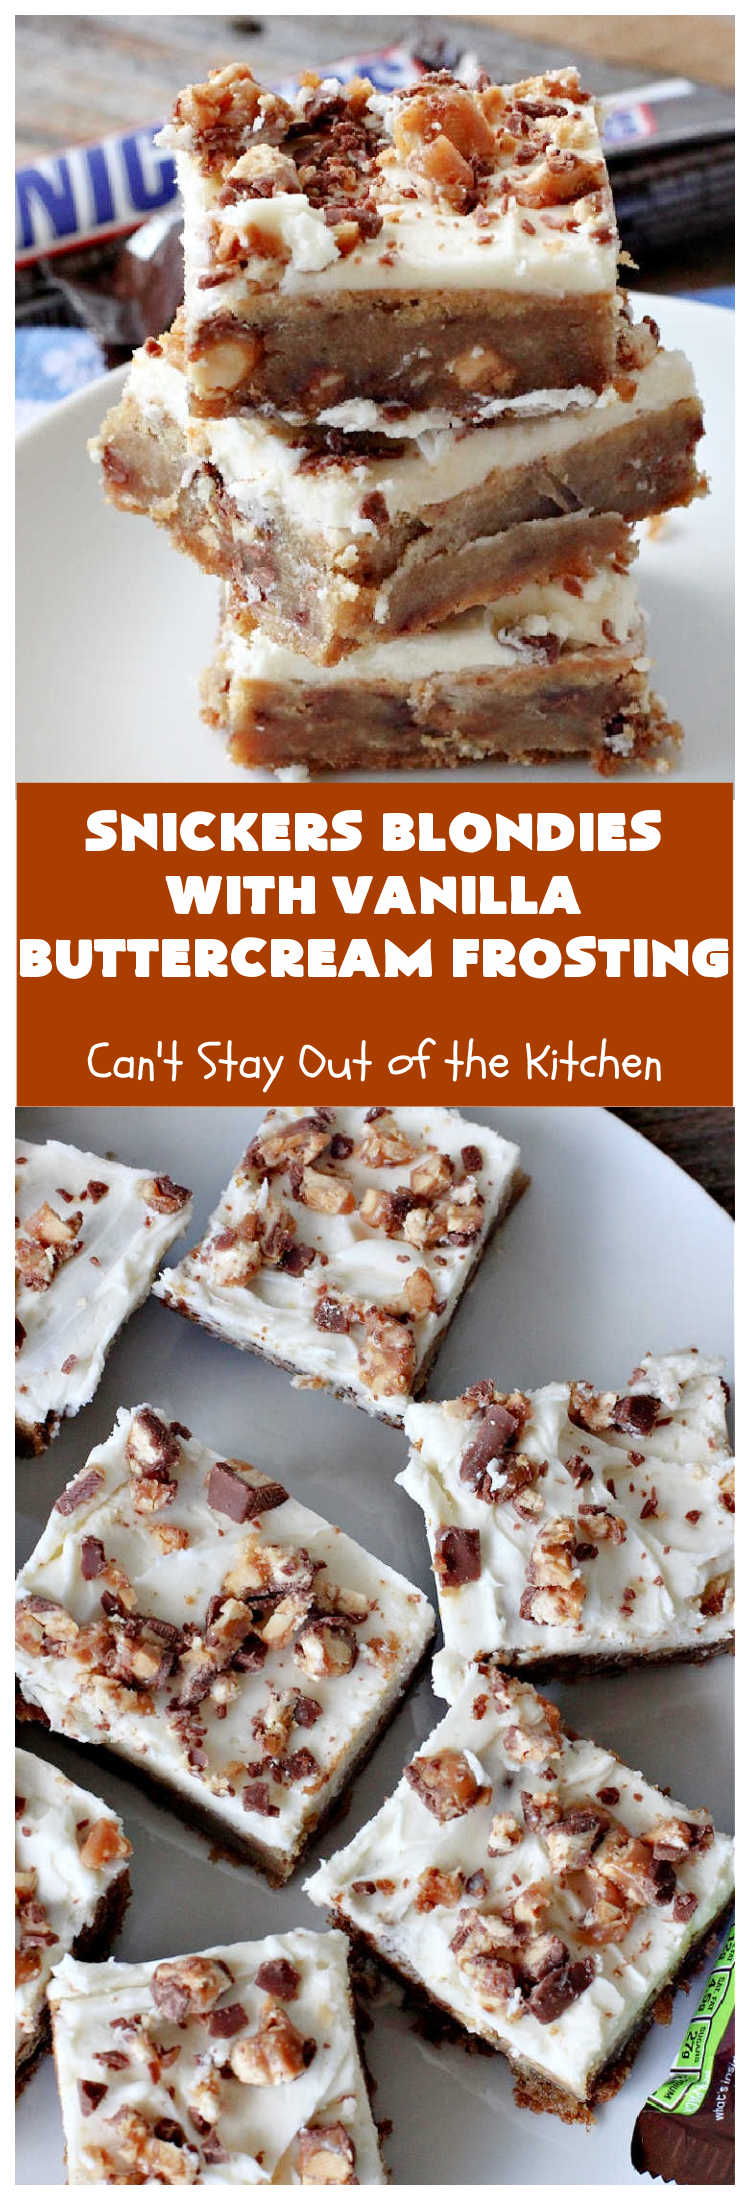 Snickers Blondies with Vanilla Buttercream Frosting | Can't Stay Out of the Kitchen | these outrageous #brownies are divine! The frosting is oh, so heavenly. One bite and you'll be drooling! #dessert #snickers #chocolate #SnickersDessert #ChocolateDessert #cookie #holiday #HolidayDessert #SnickersBlondies #SnickersBlondiesWithVanillaButtercreamFrosting